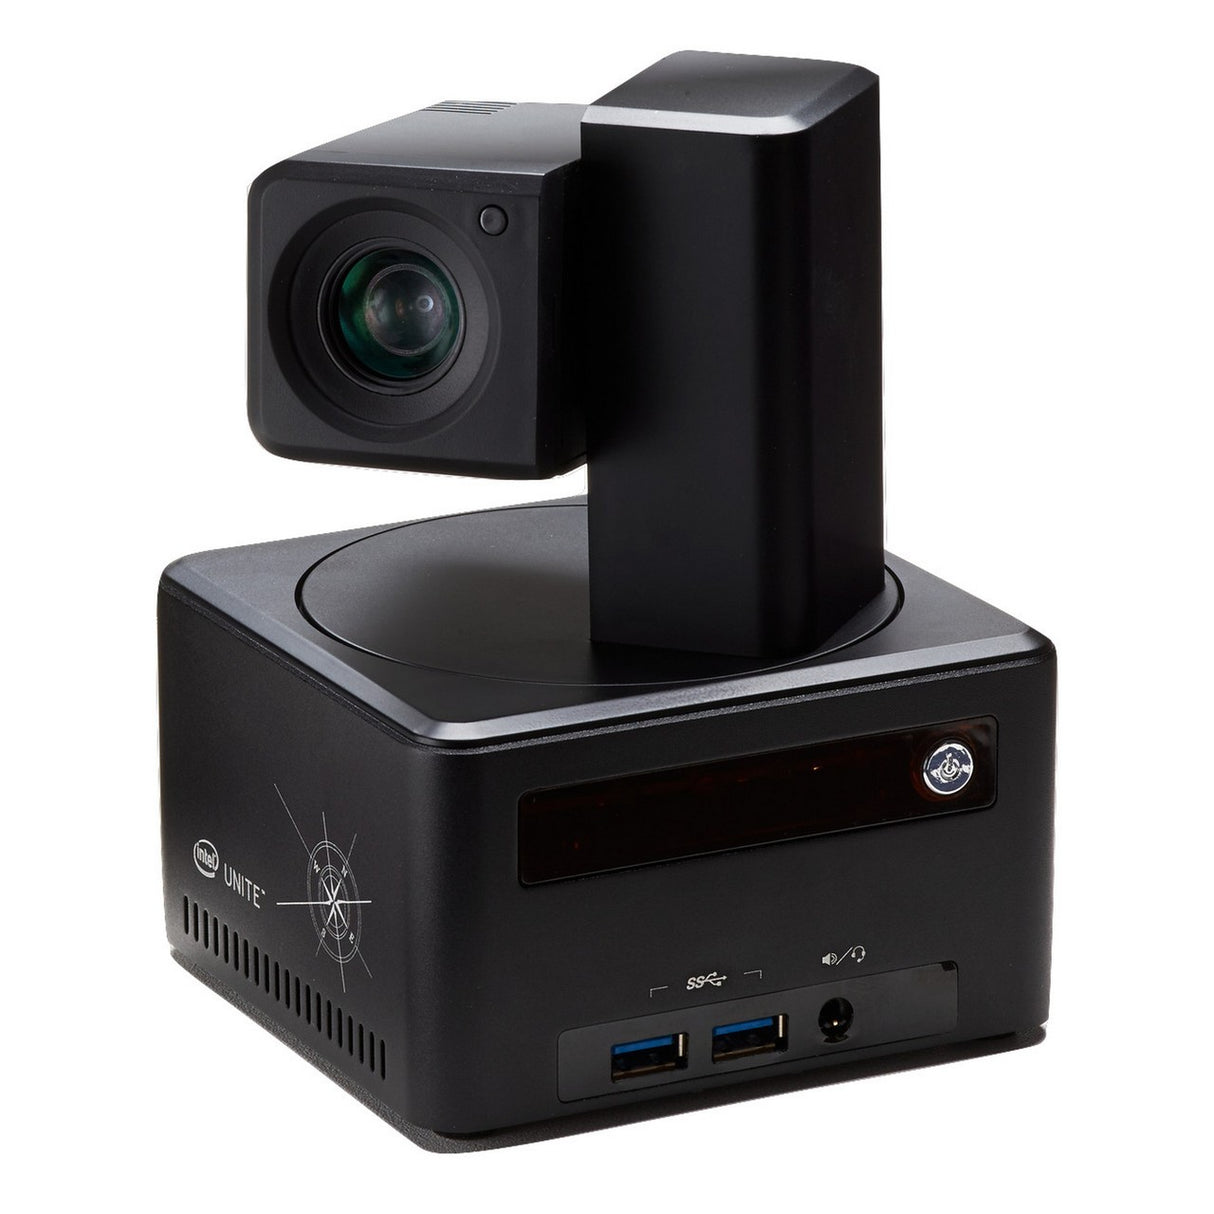 VDO360 Clearwater PTZPC Compass Camera with Core i5 PC, Wireless Speaker, Microphone, Keyboard and Mouse